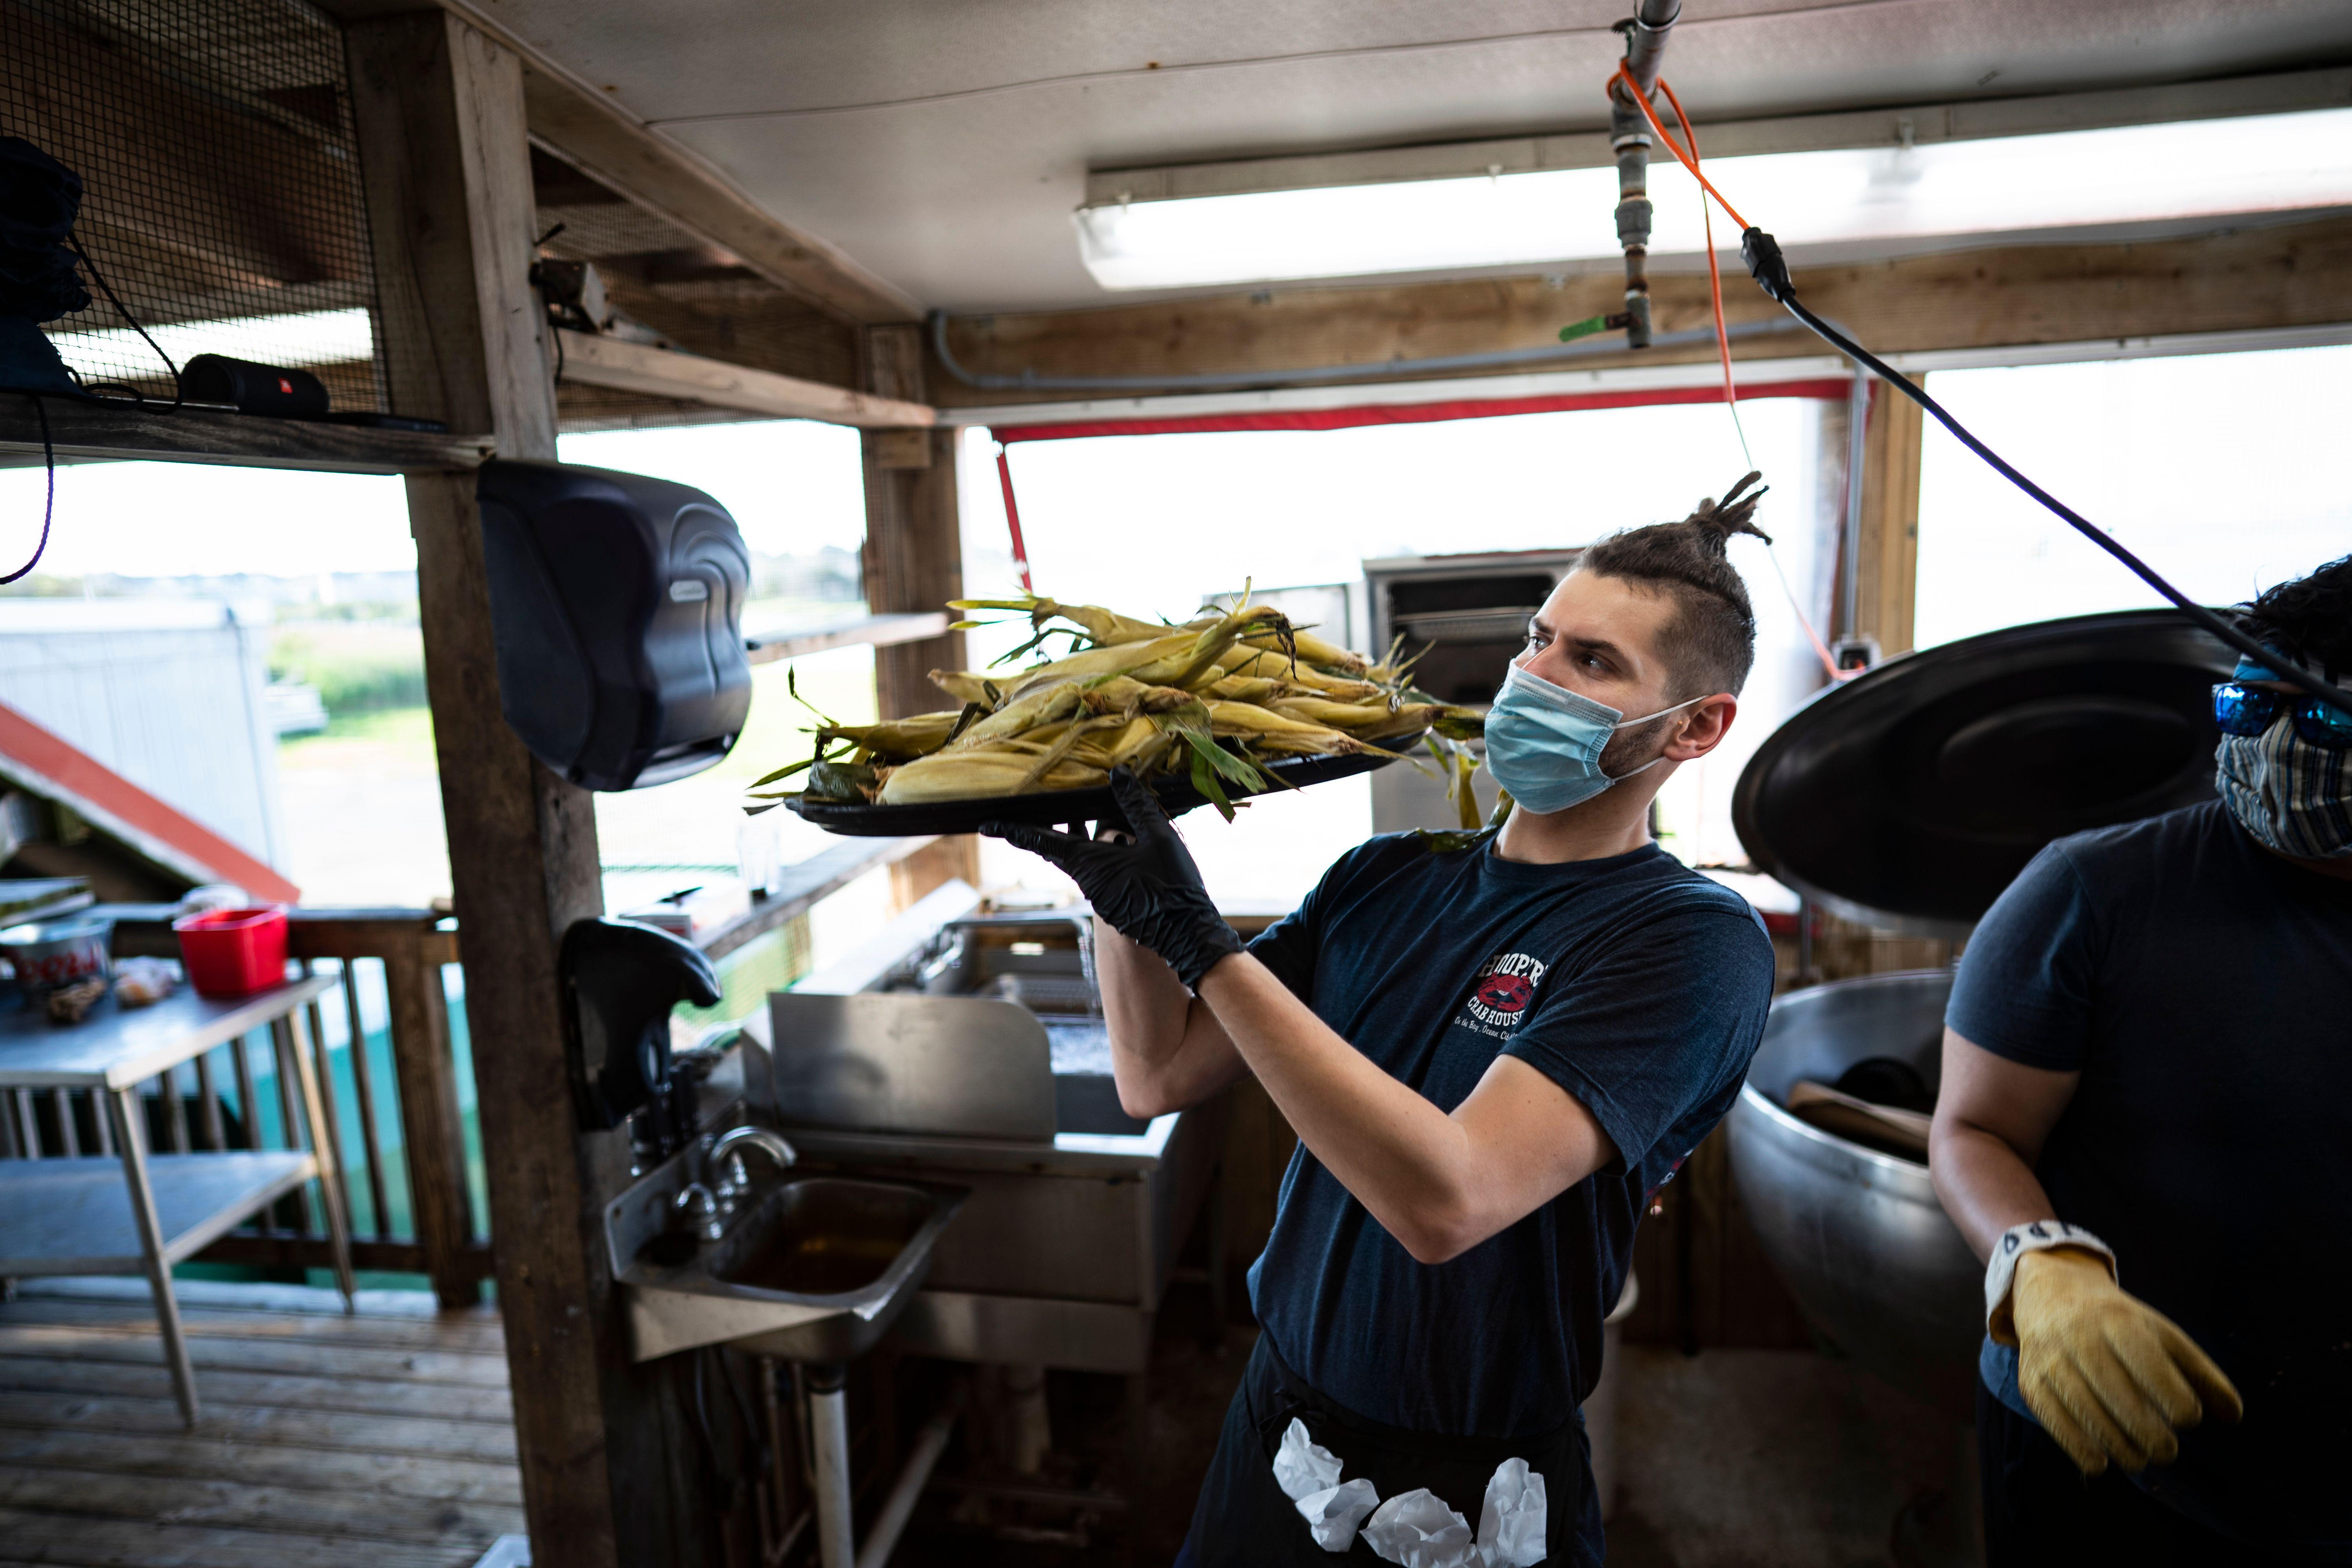 A server wears a mask and gloves while working, as Hoopers Crab House opens for in-person dining, amid the coronavirus pandemic, on May 30, 2020 in Ocean City, Maryland. - On the evening of May 29, 2020 restaurants and bars in the state of Maryland were opened for outdoor and open air dining. (Photo by Alex Edelman / AFP) (Photo by ALEX EDELMAN/AFP via Getty Images)